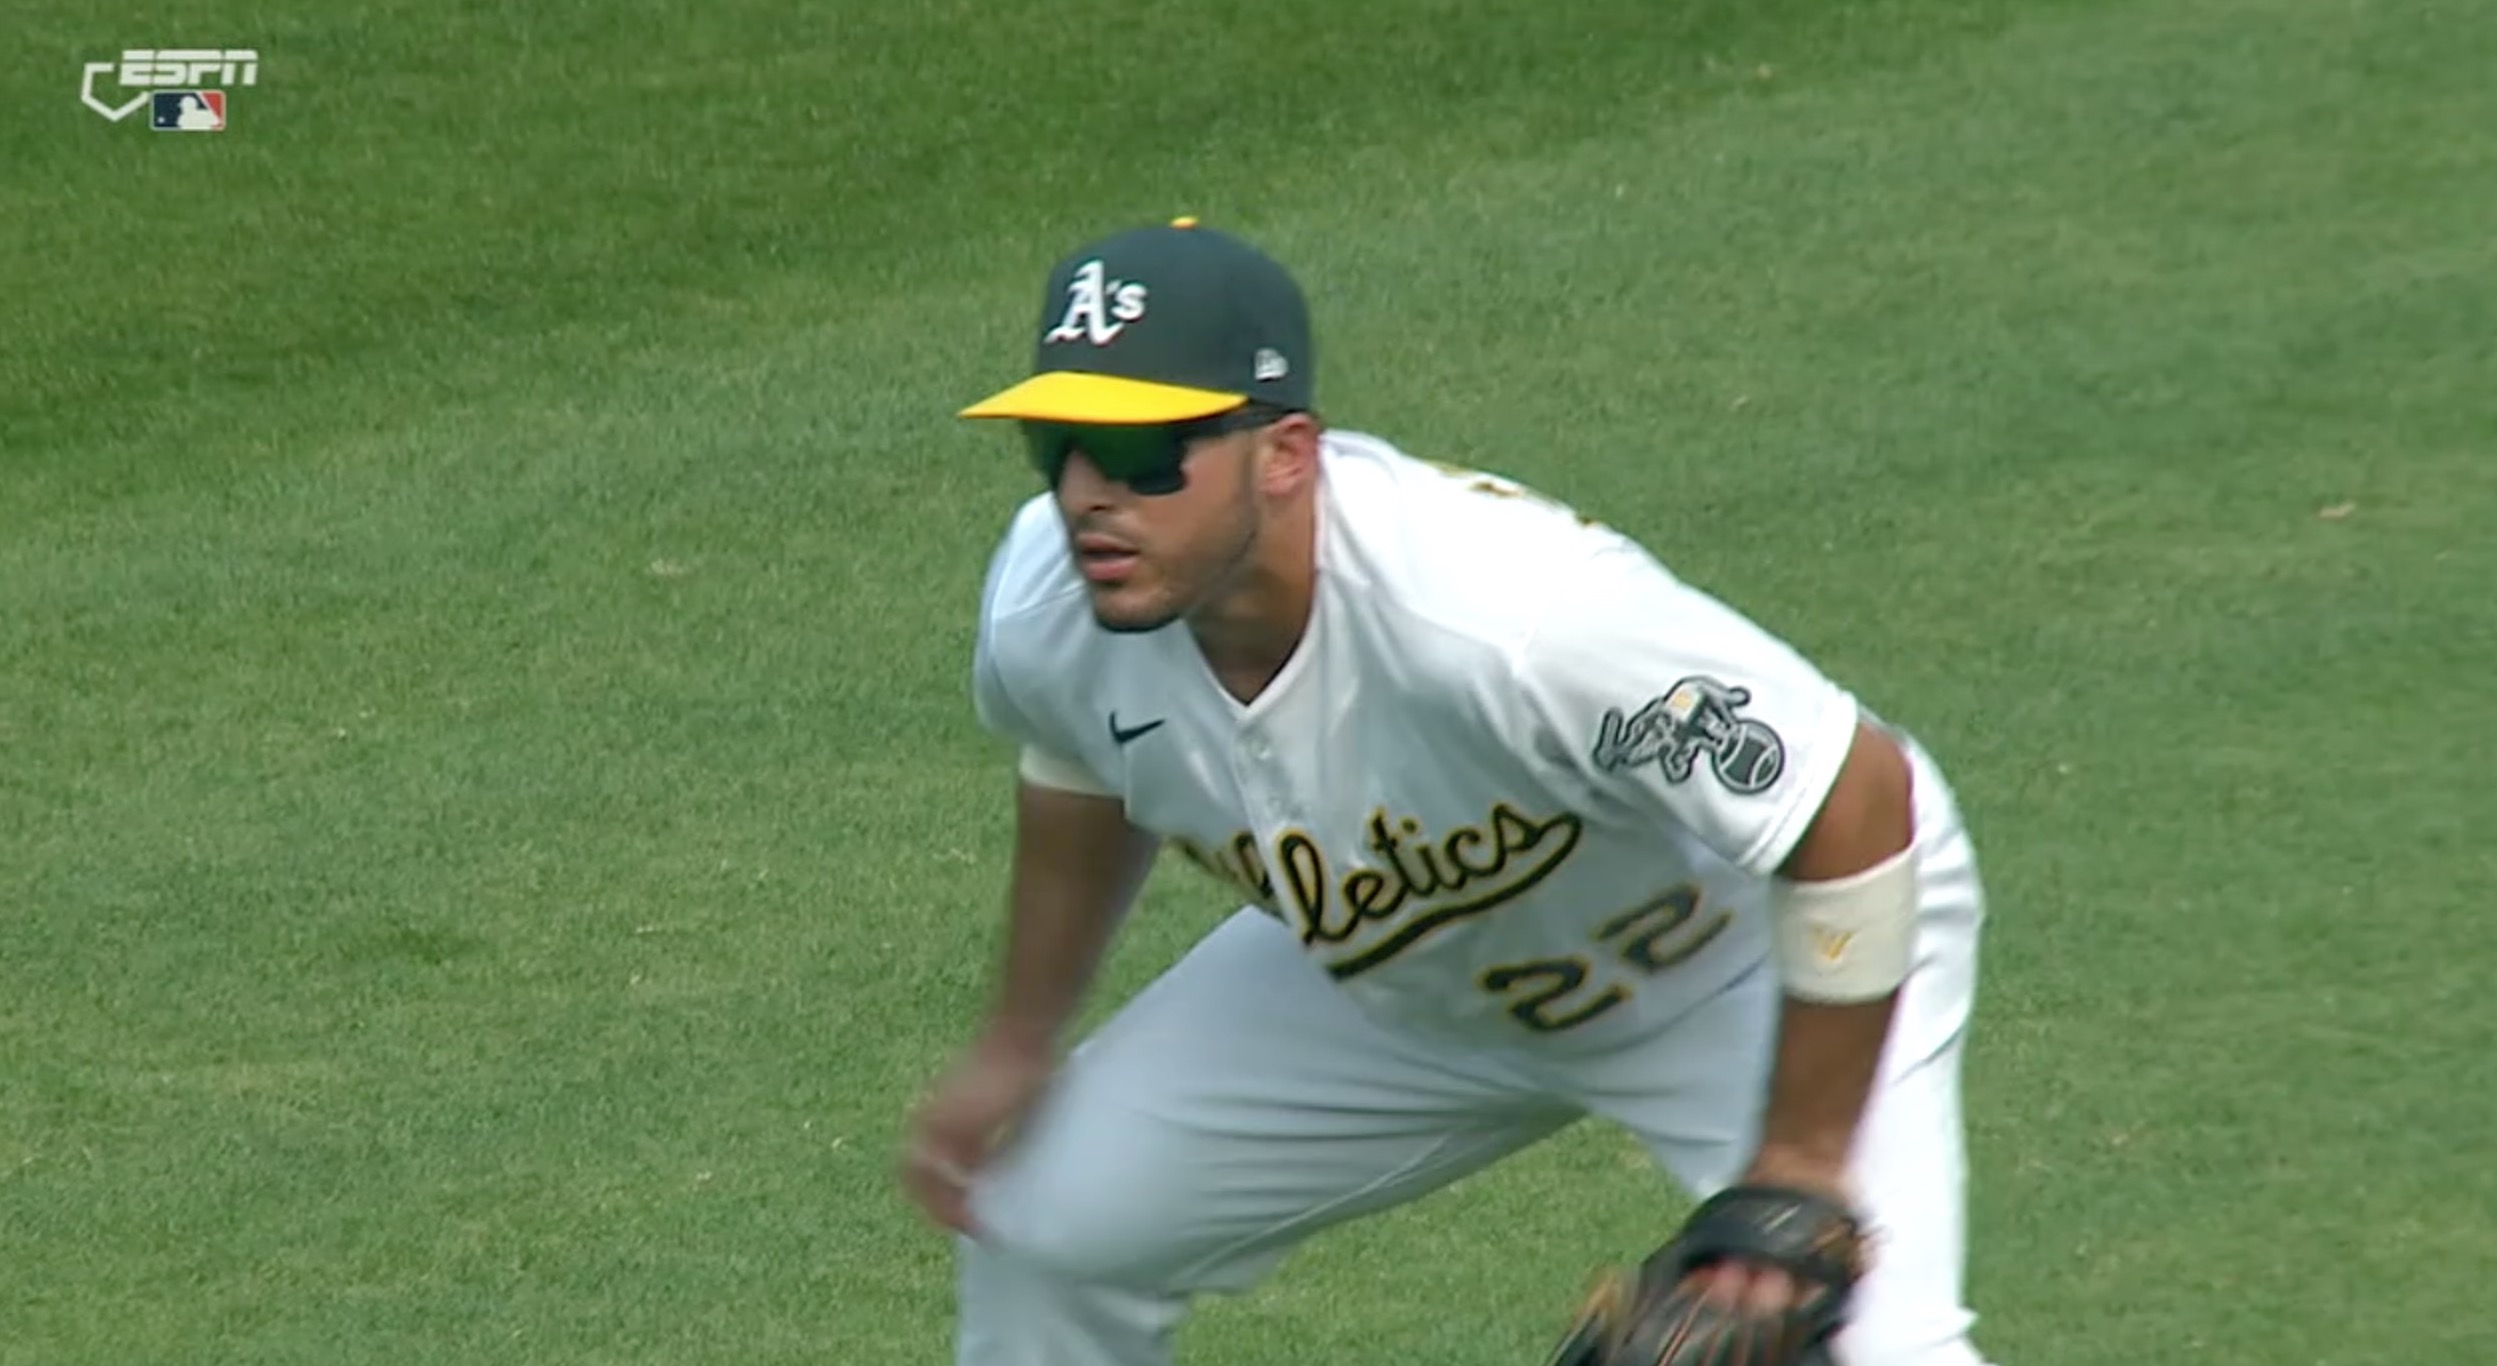 Laureano gets ready in the outfield.